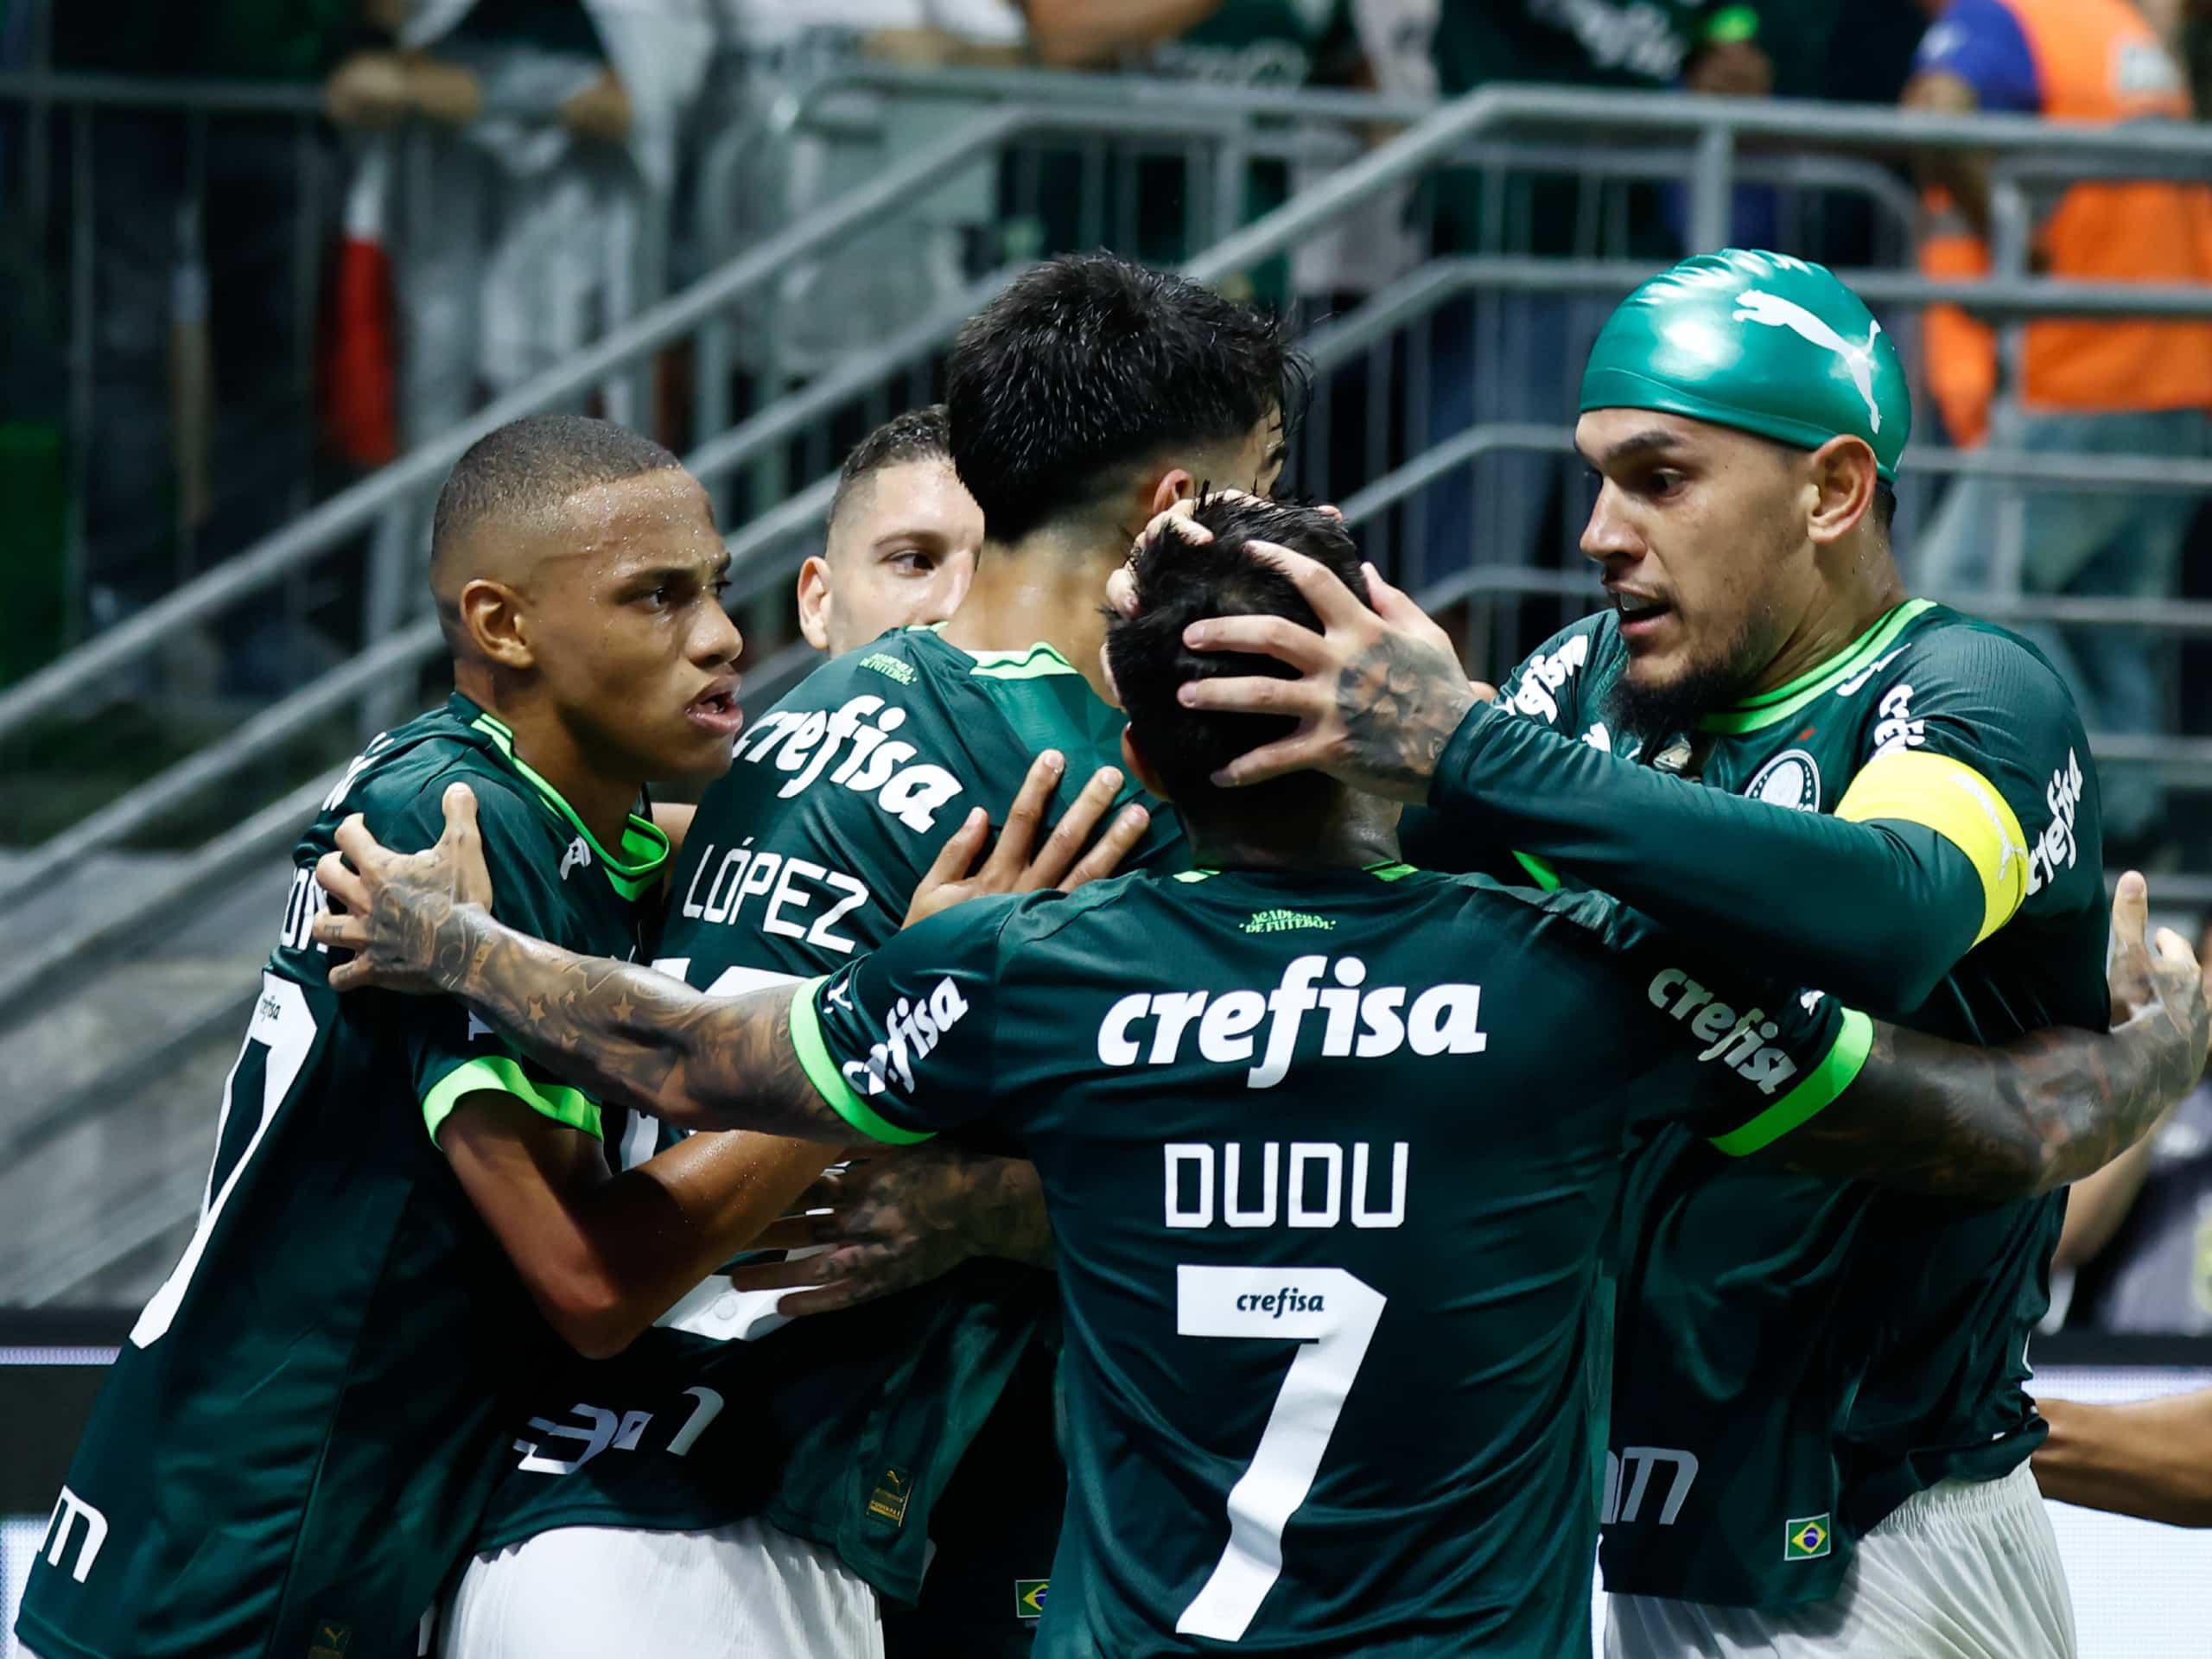 Match between Palmeiras and Tombense for the third phase of the 2023 Copa do Brasil